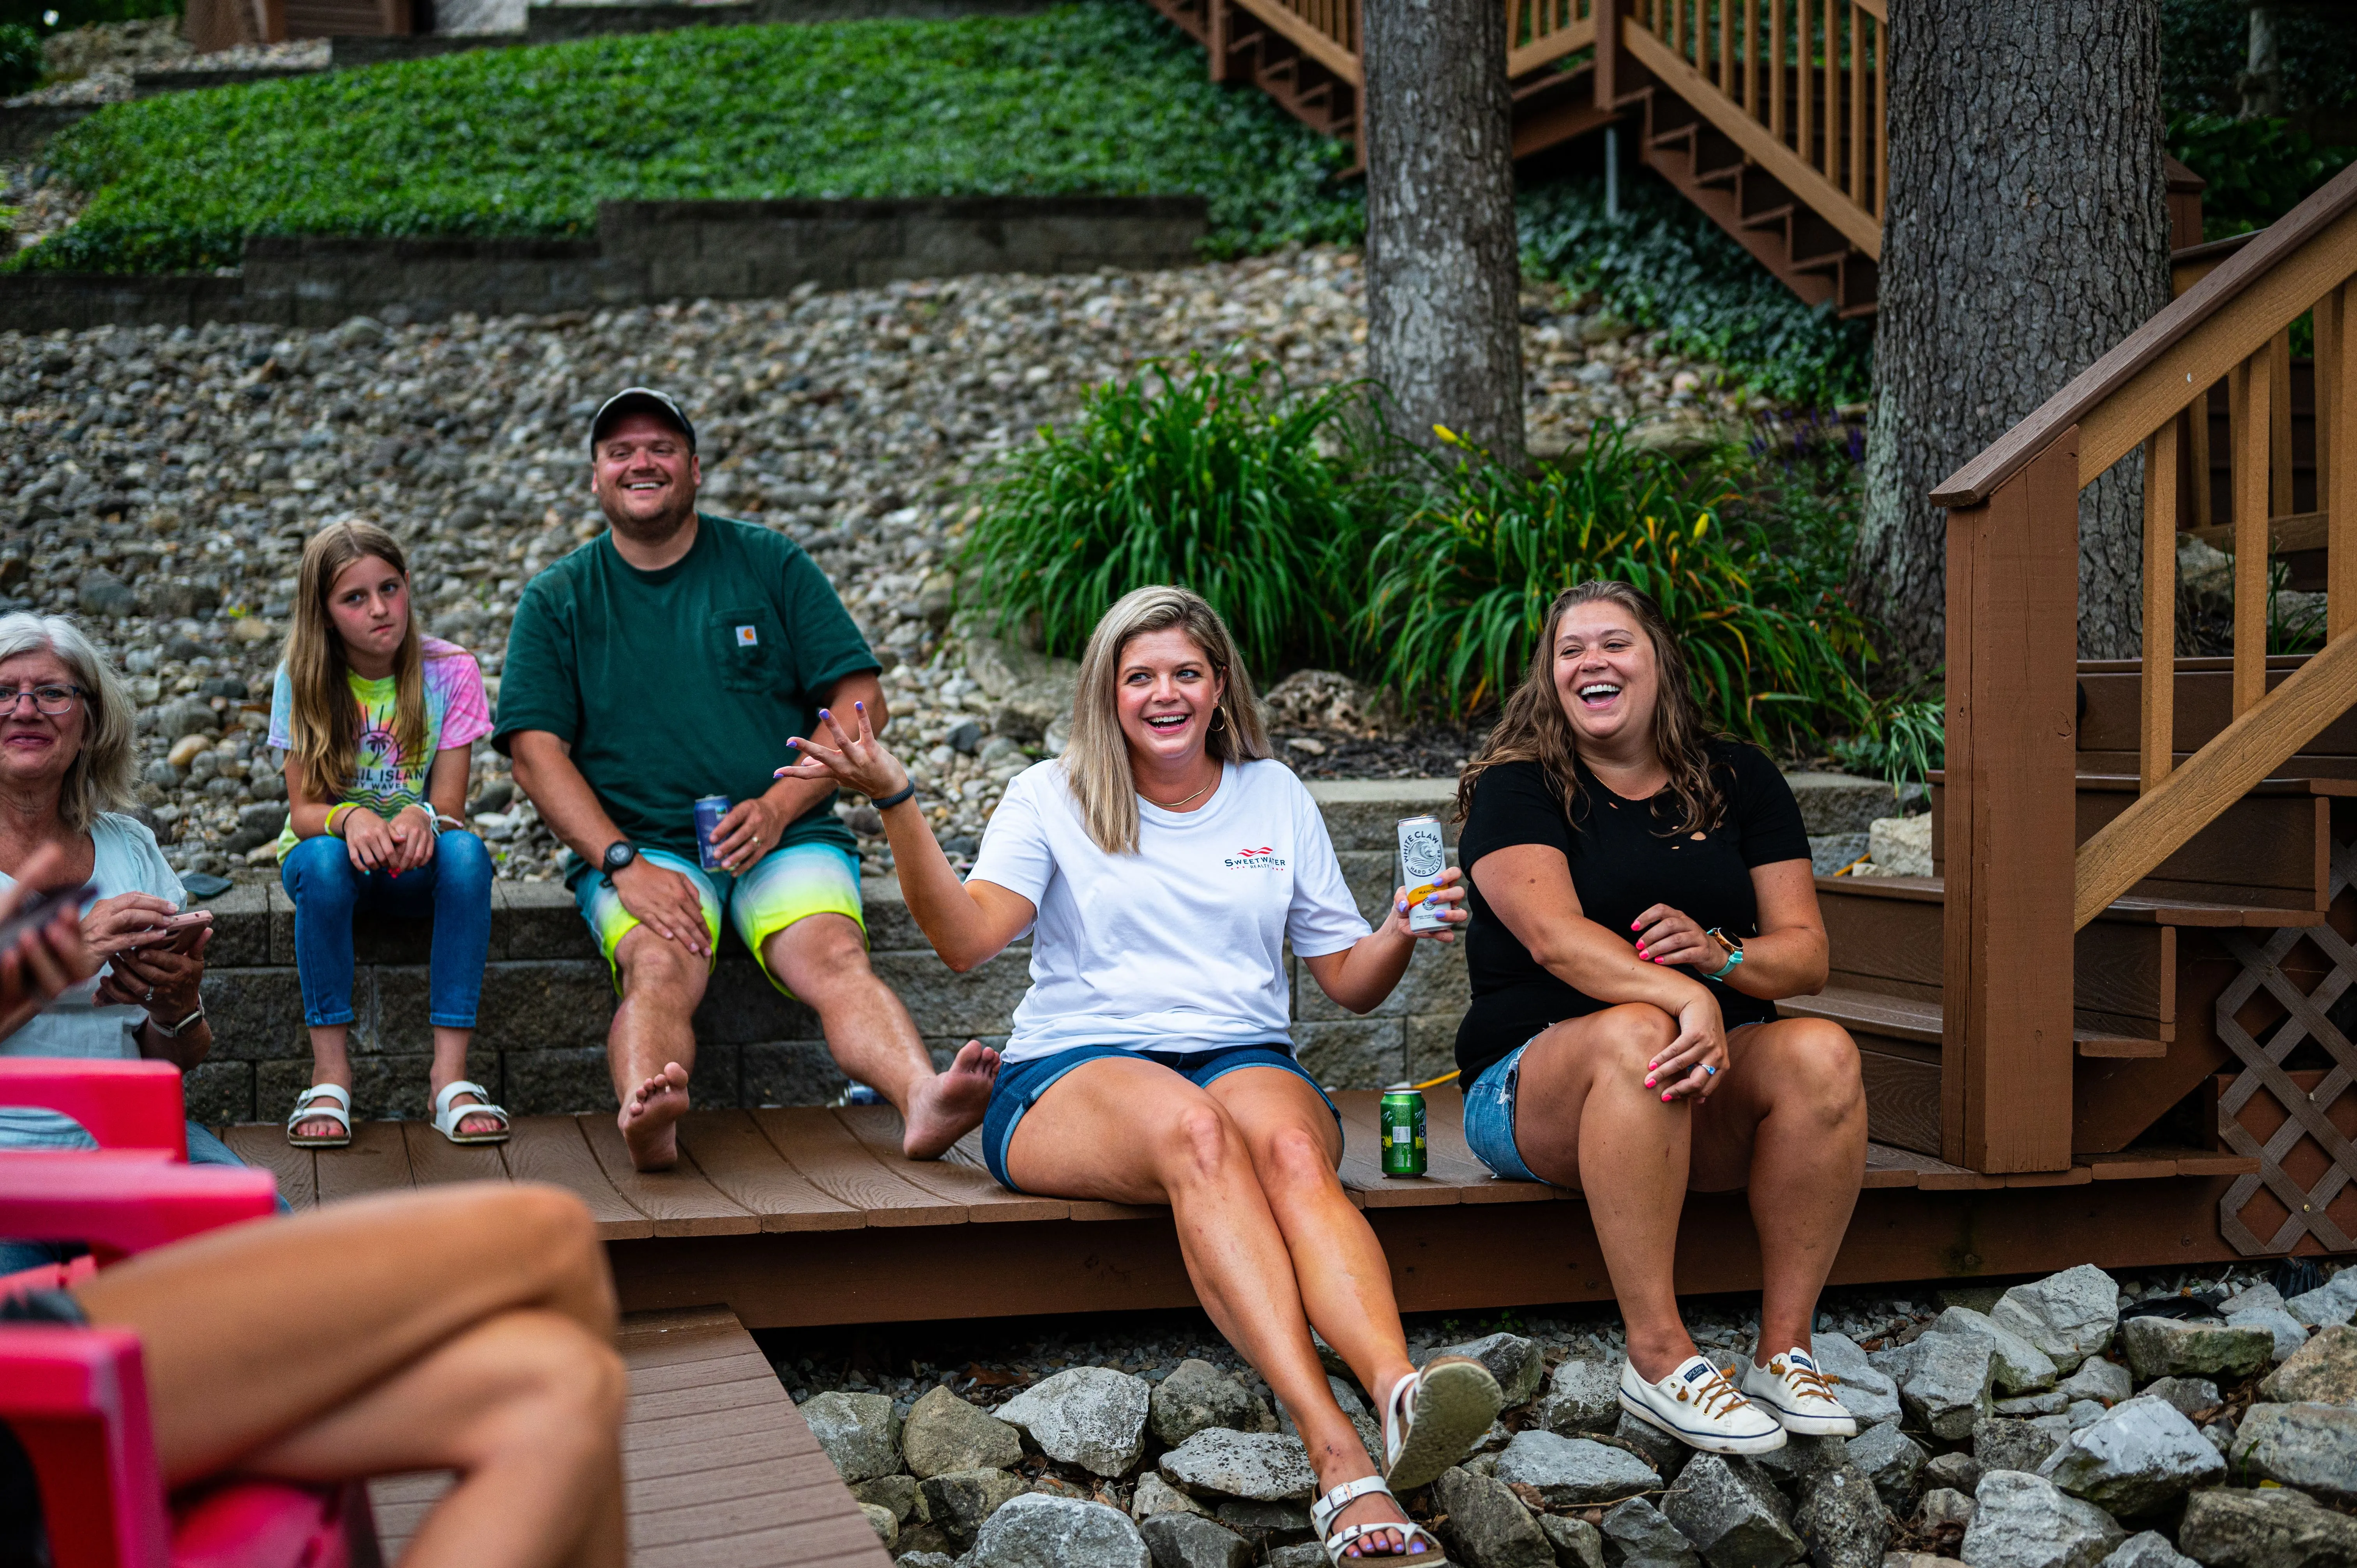 Group of people smiling and sitting on a wooden dock, with one person holding a green plastic cup, in a backyard setting with stairs and gravel.